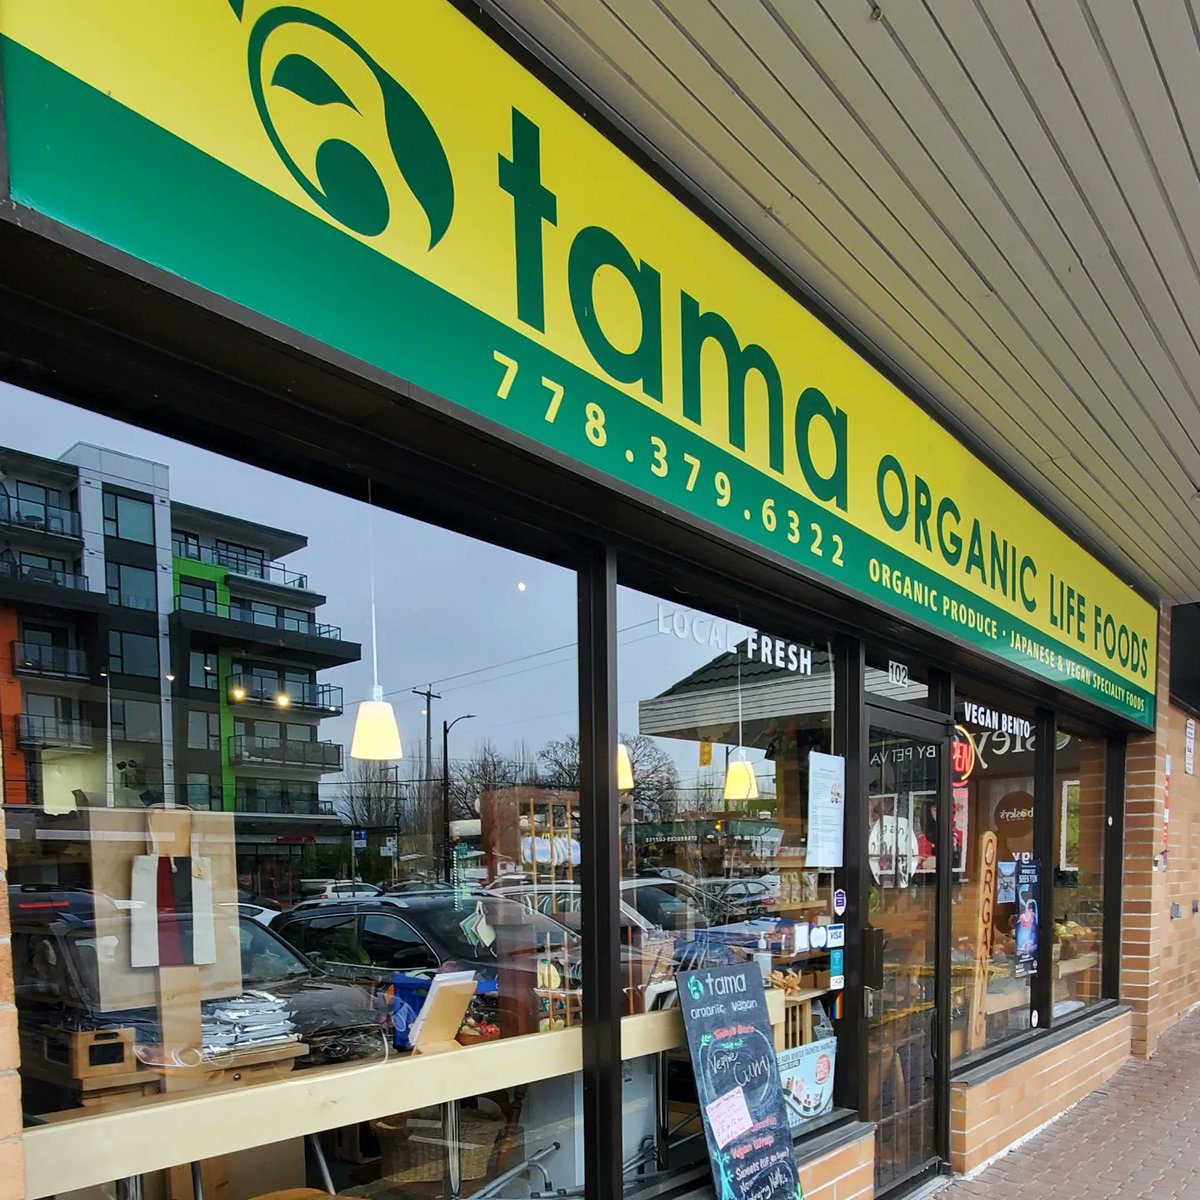 Time to recharge the lifeforce with a vegan bento box + housemade natto from Tama Organic in #HastingsSunrise

tamaorganic.com

#shoplocal